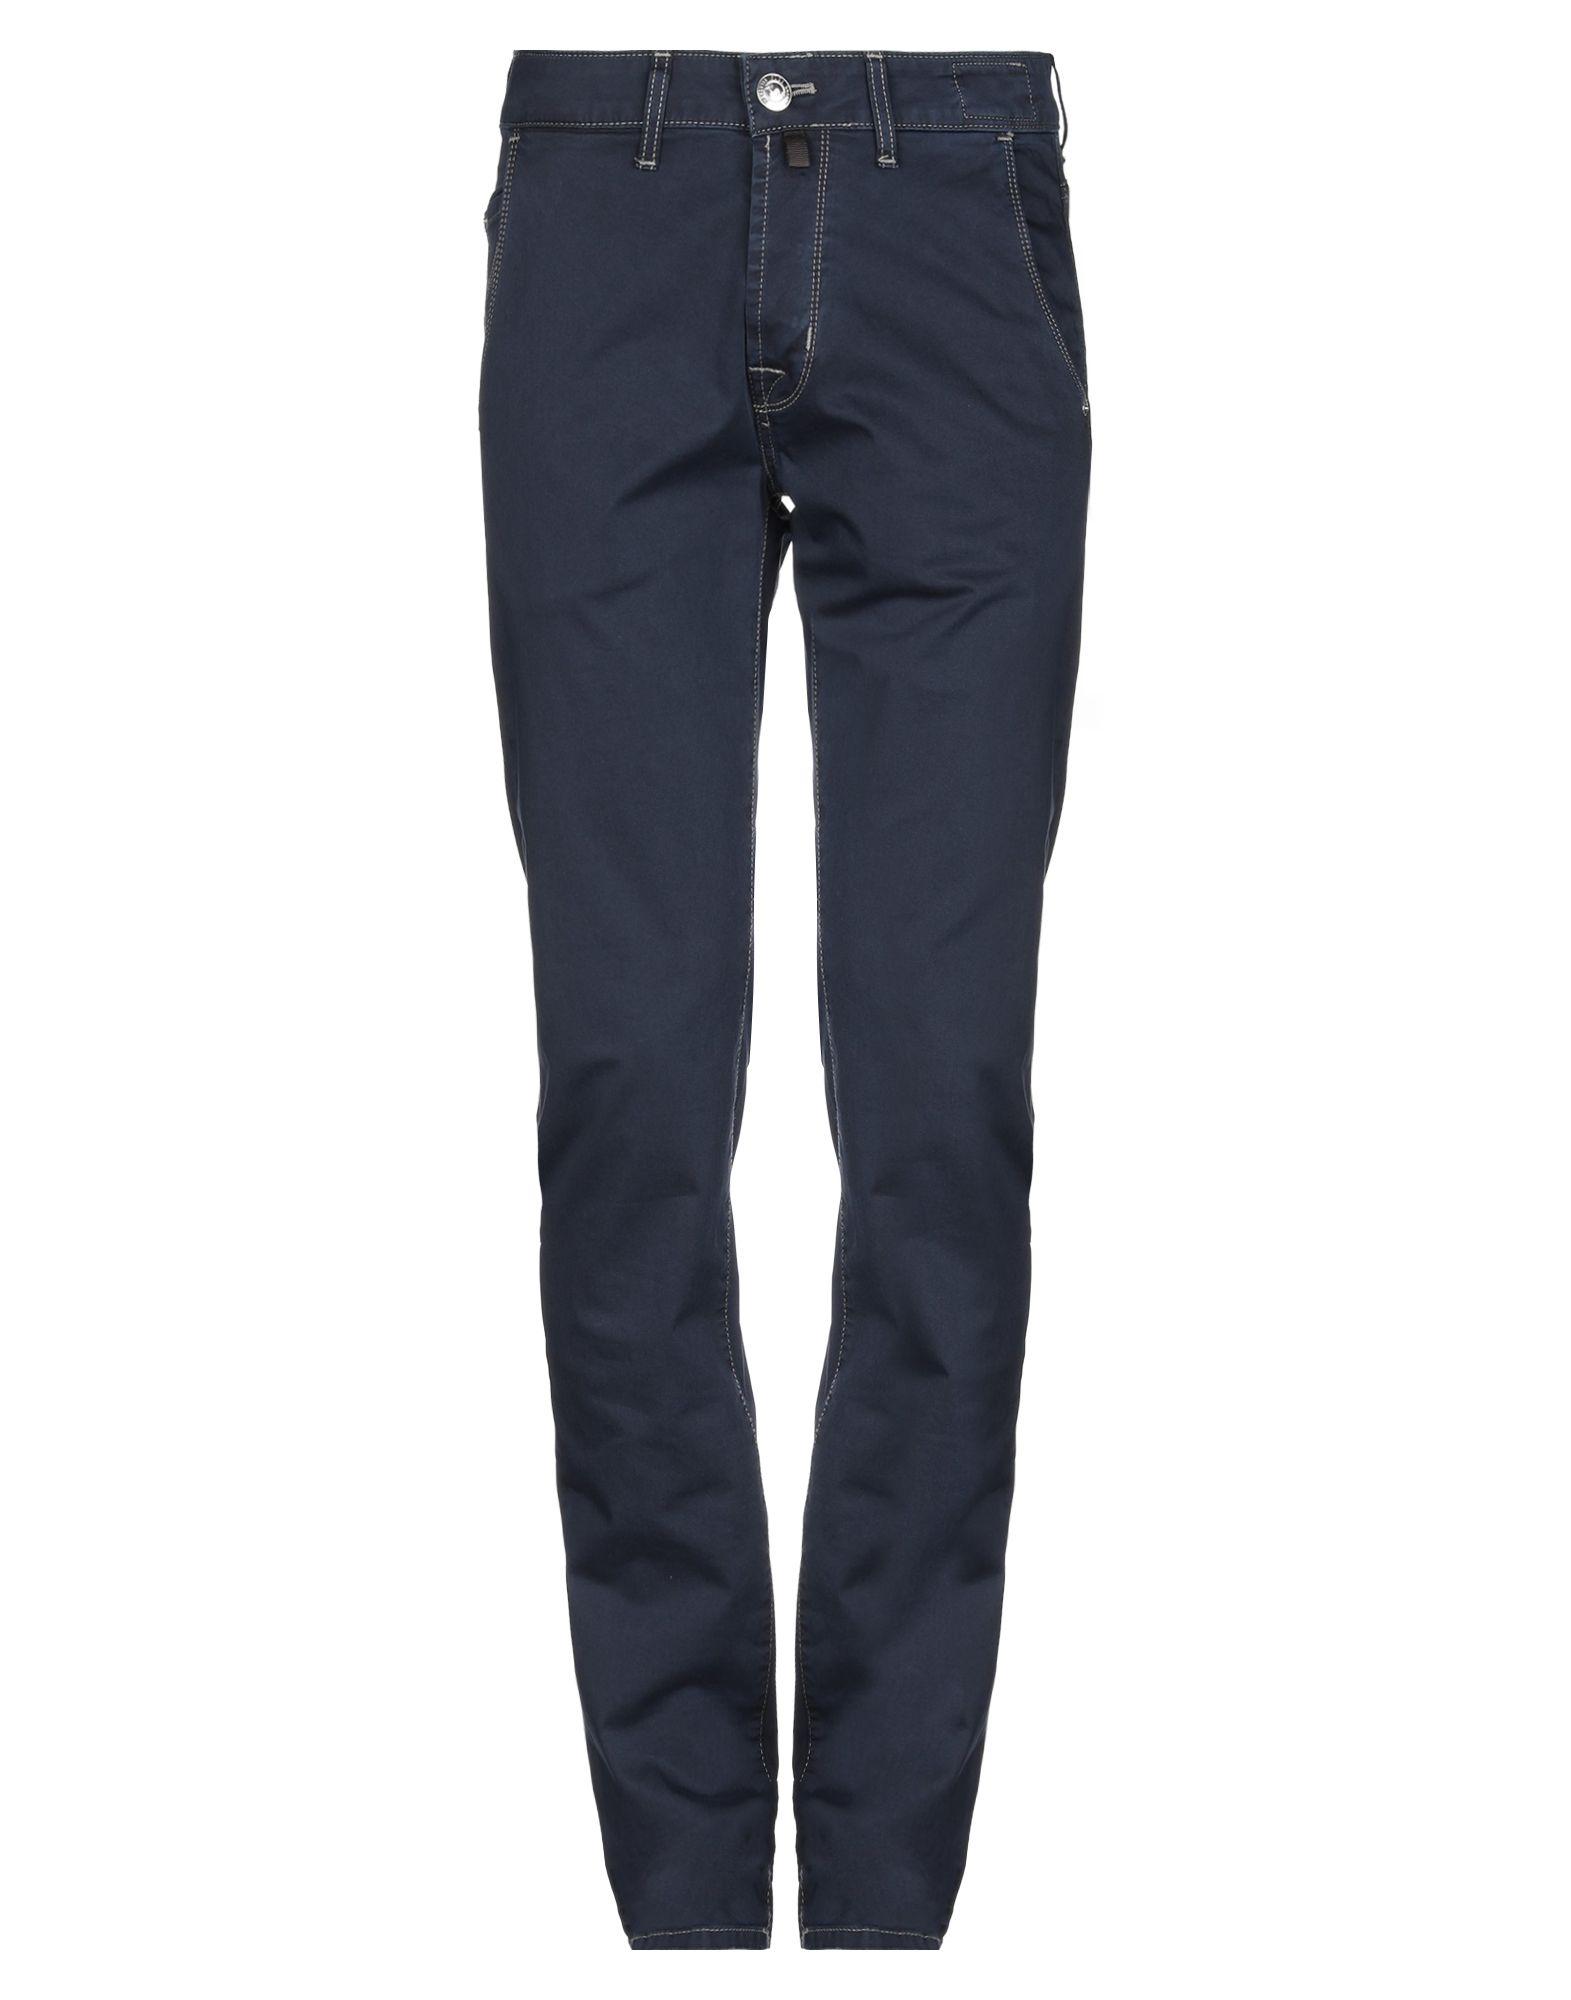 Pt05 Cotton Casual Pants in Dark Blue (Blue) for Men - Lyst